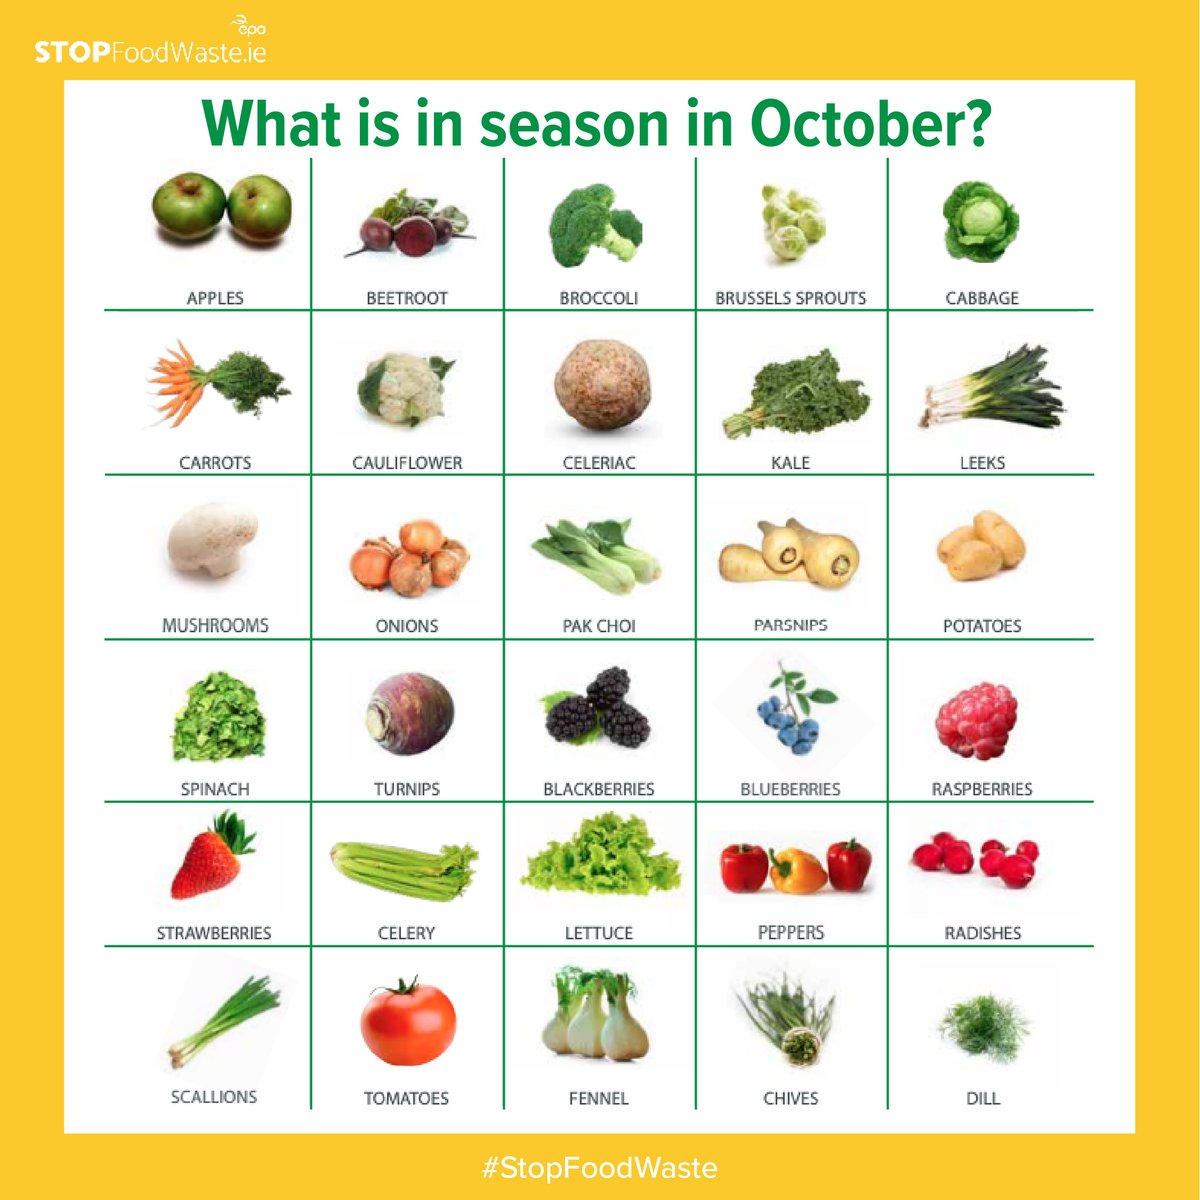 Nothing scary about this month’s what’s in season👻 With so much variety in this month’s seasonal calendar, there’s lots of fruit and veg for you to enjoy! Download, save or screengrab our October seasonal guide to #StopFoodWaste this month.